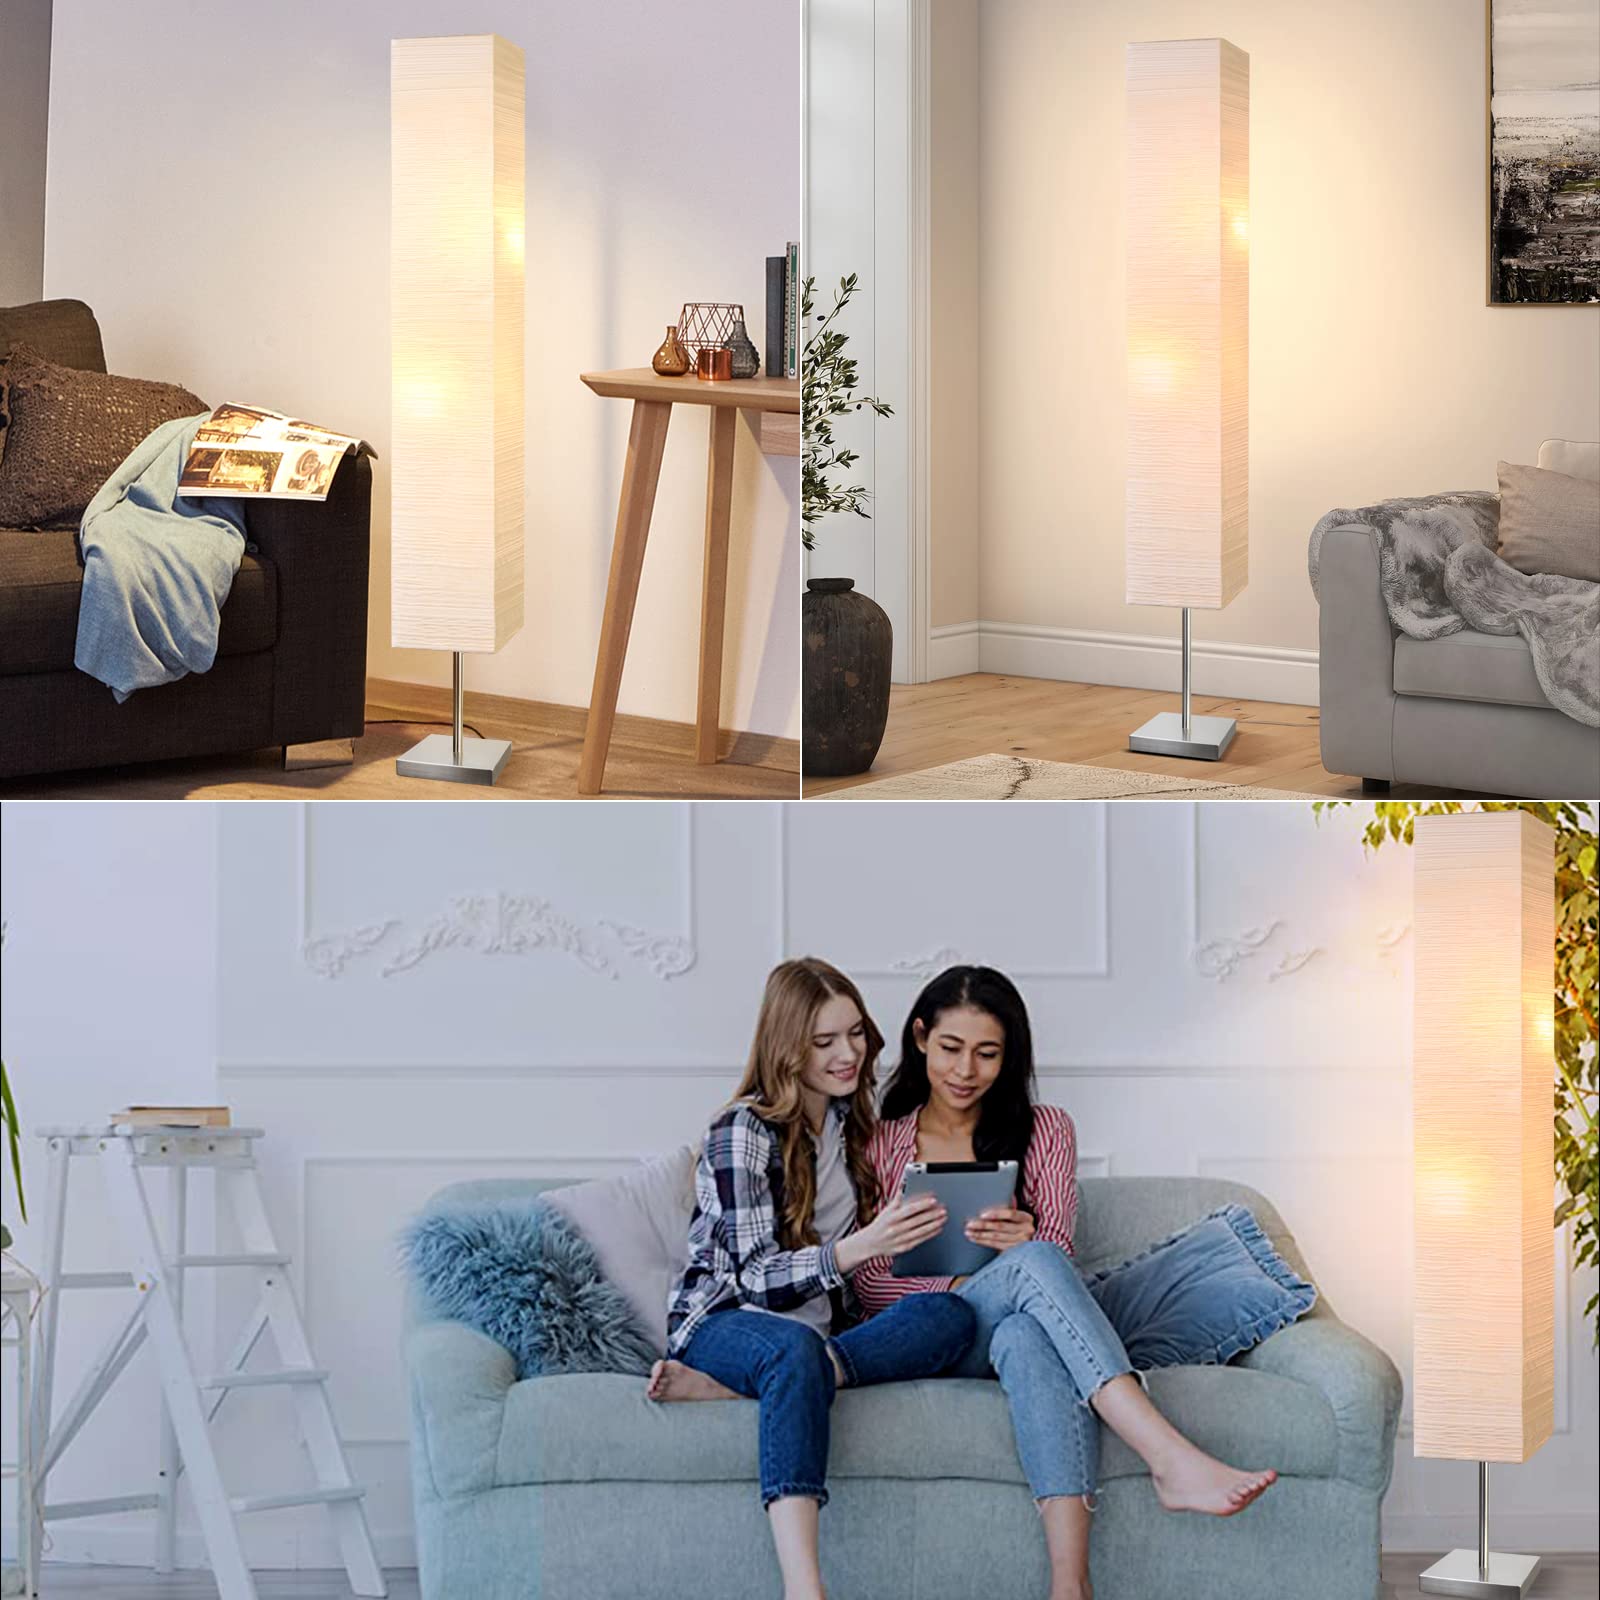 Modern Floor Lamp, Dimmable 3 Levels Brightness Paper Tall Lamp Standing Lamps with Lampshade, 55'' Minimalist Floor Lamps for Office, Kids Room, Reading, Home Decor (Off White)